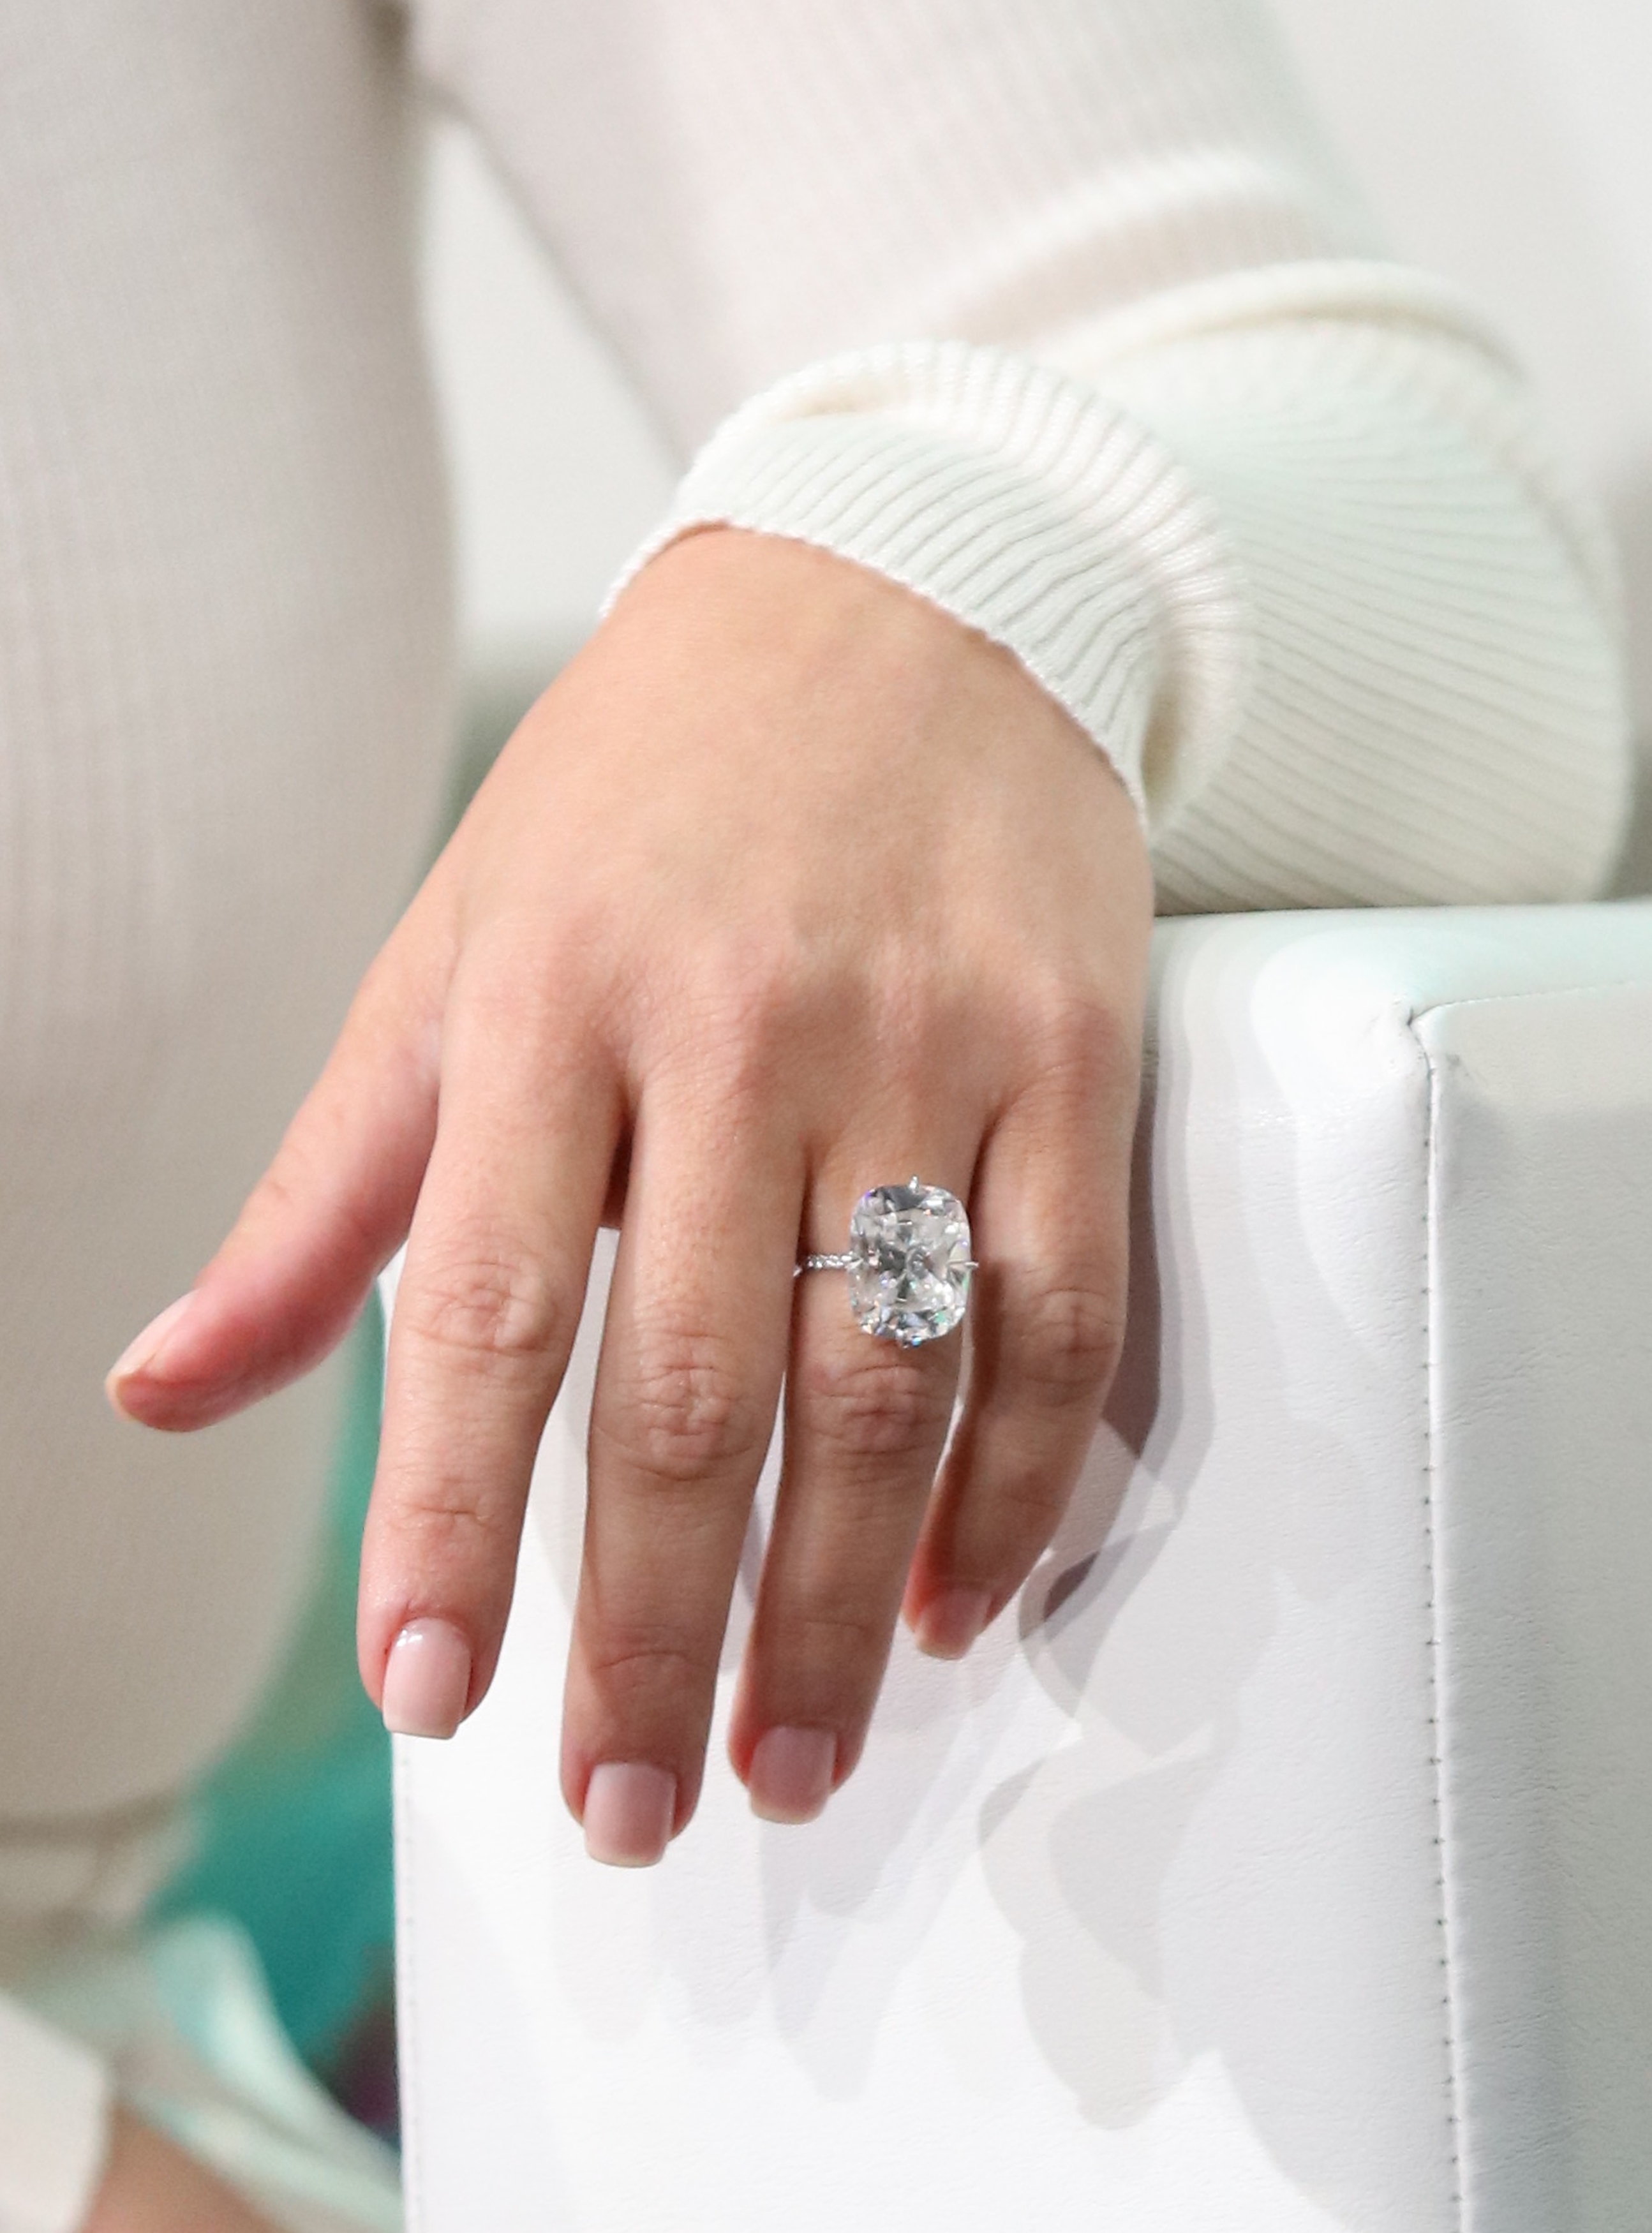 Did Kim Kardashian Get Her Stolen Engagement Ring Back? | In Touch Weekly